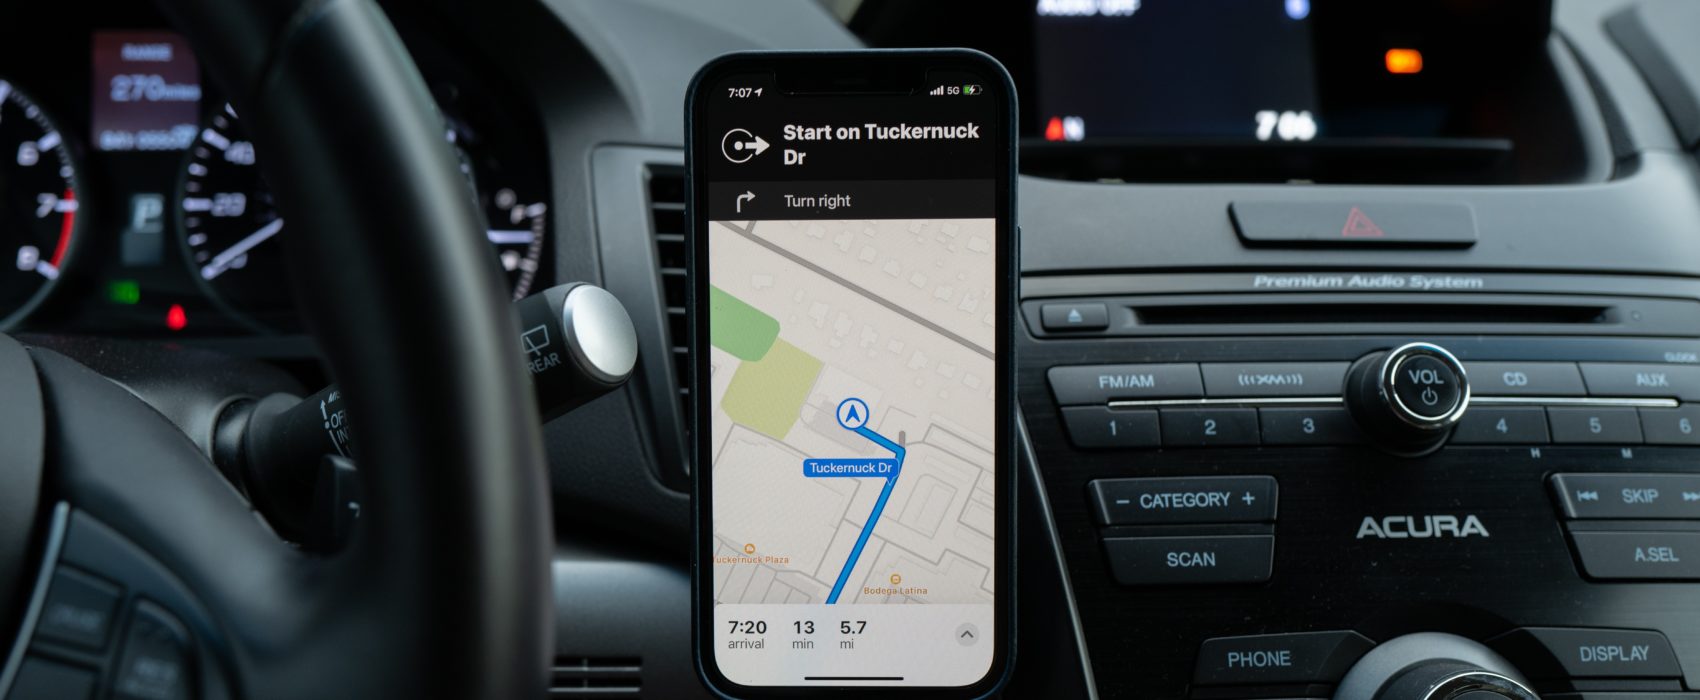 Maps and navigation on a smartphone in a car